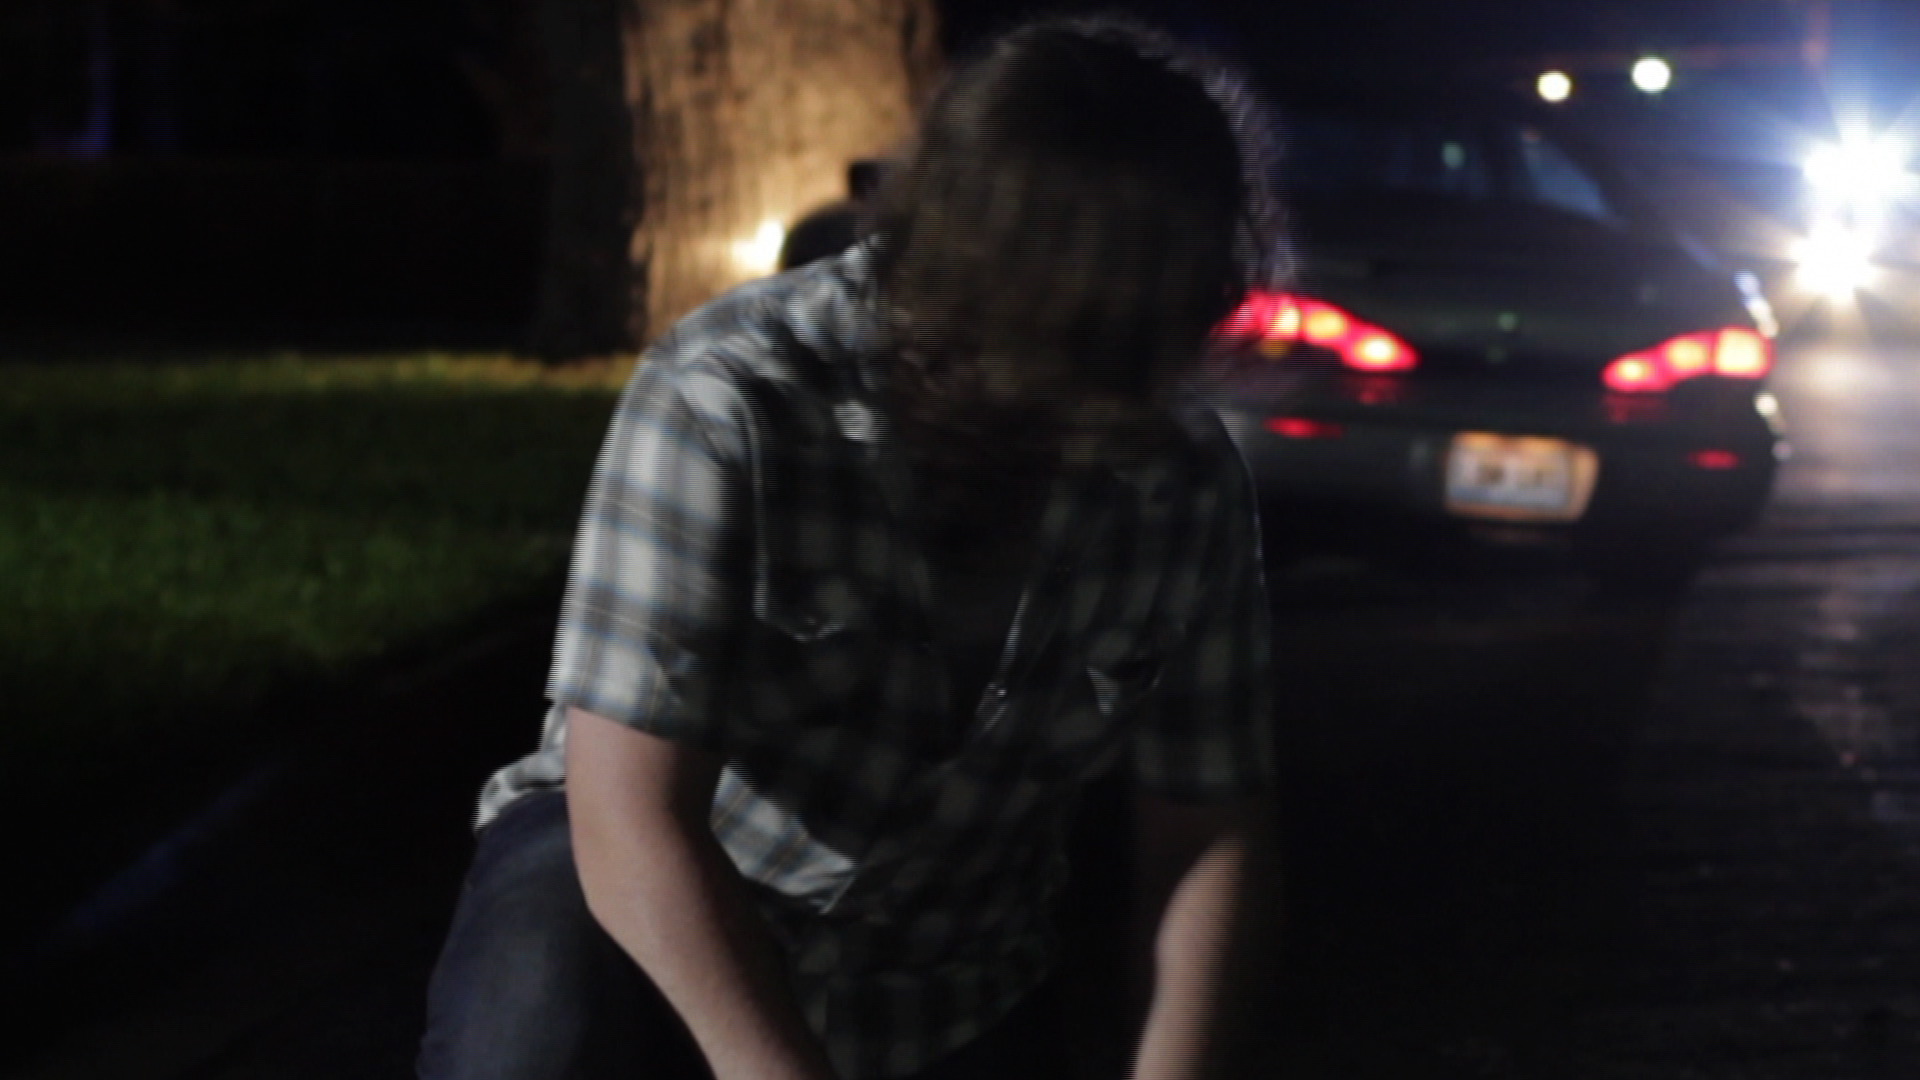 Jon Brewer sees the cops are coming as he leans over Jake's body in a scene from 